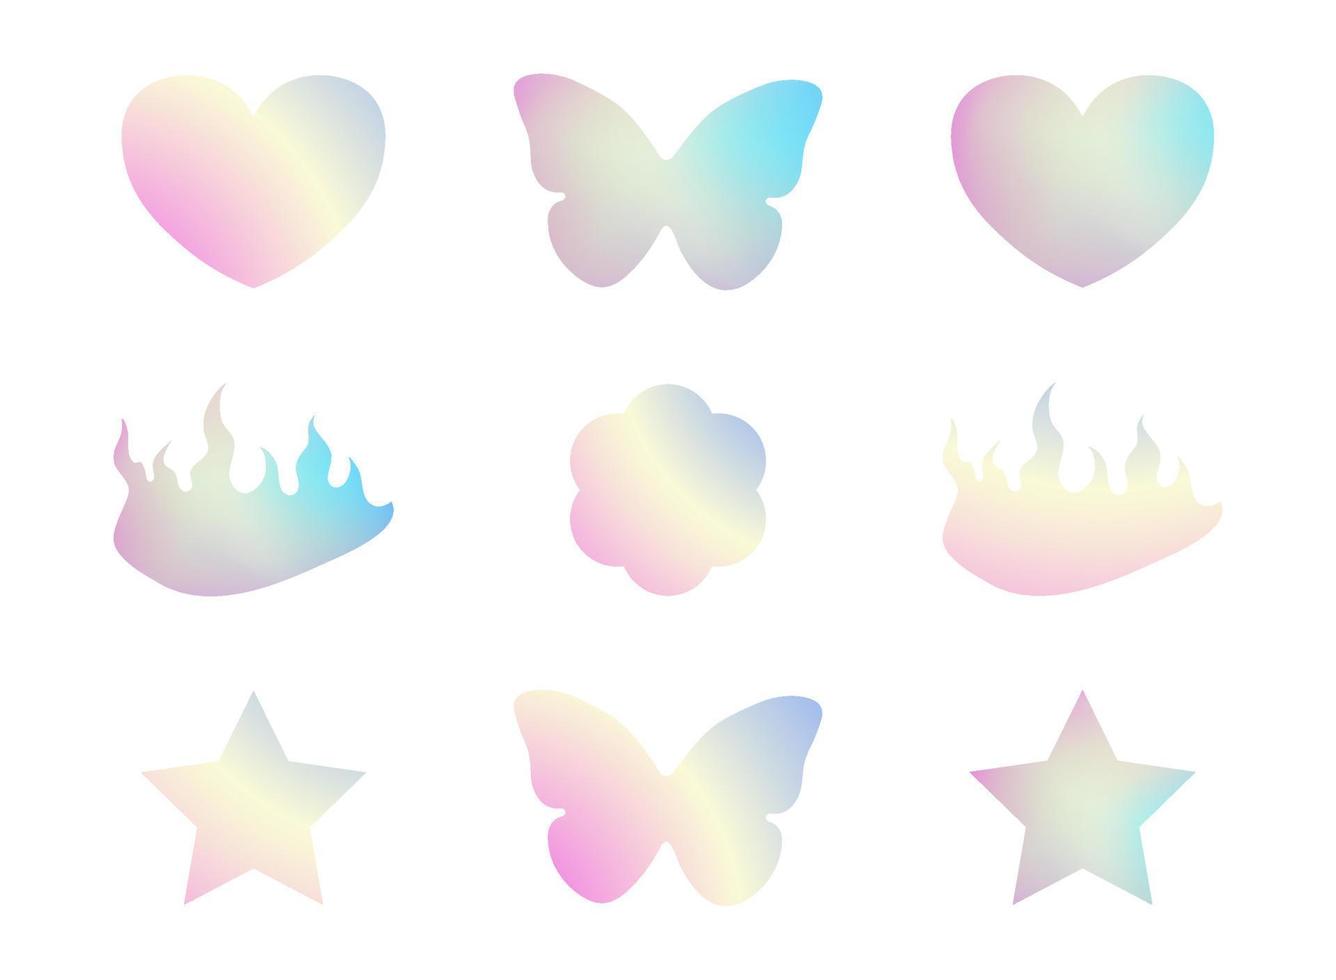 y2k trendy gradient sticker set, butterfly, star, heart, 90s and 2000s style, nostalgia, glamorous, vector illustration